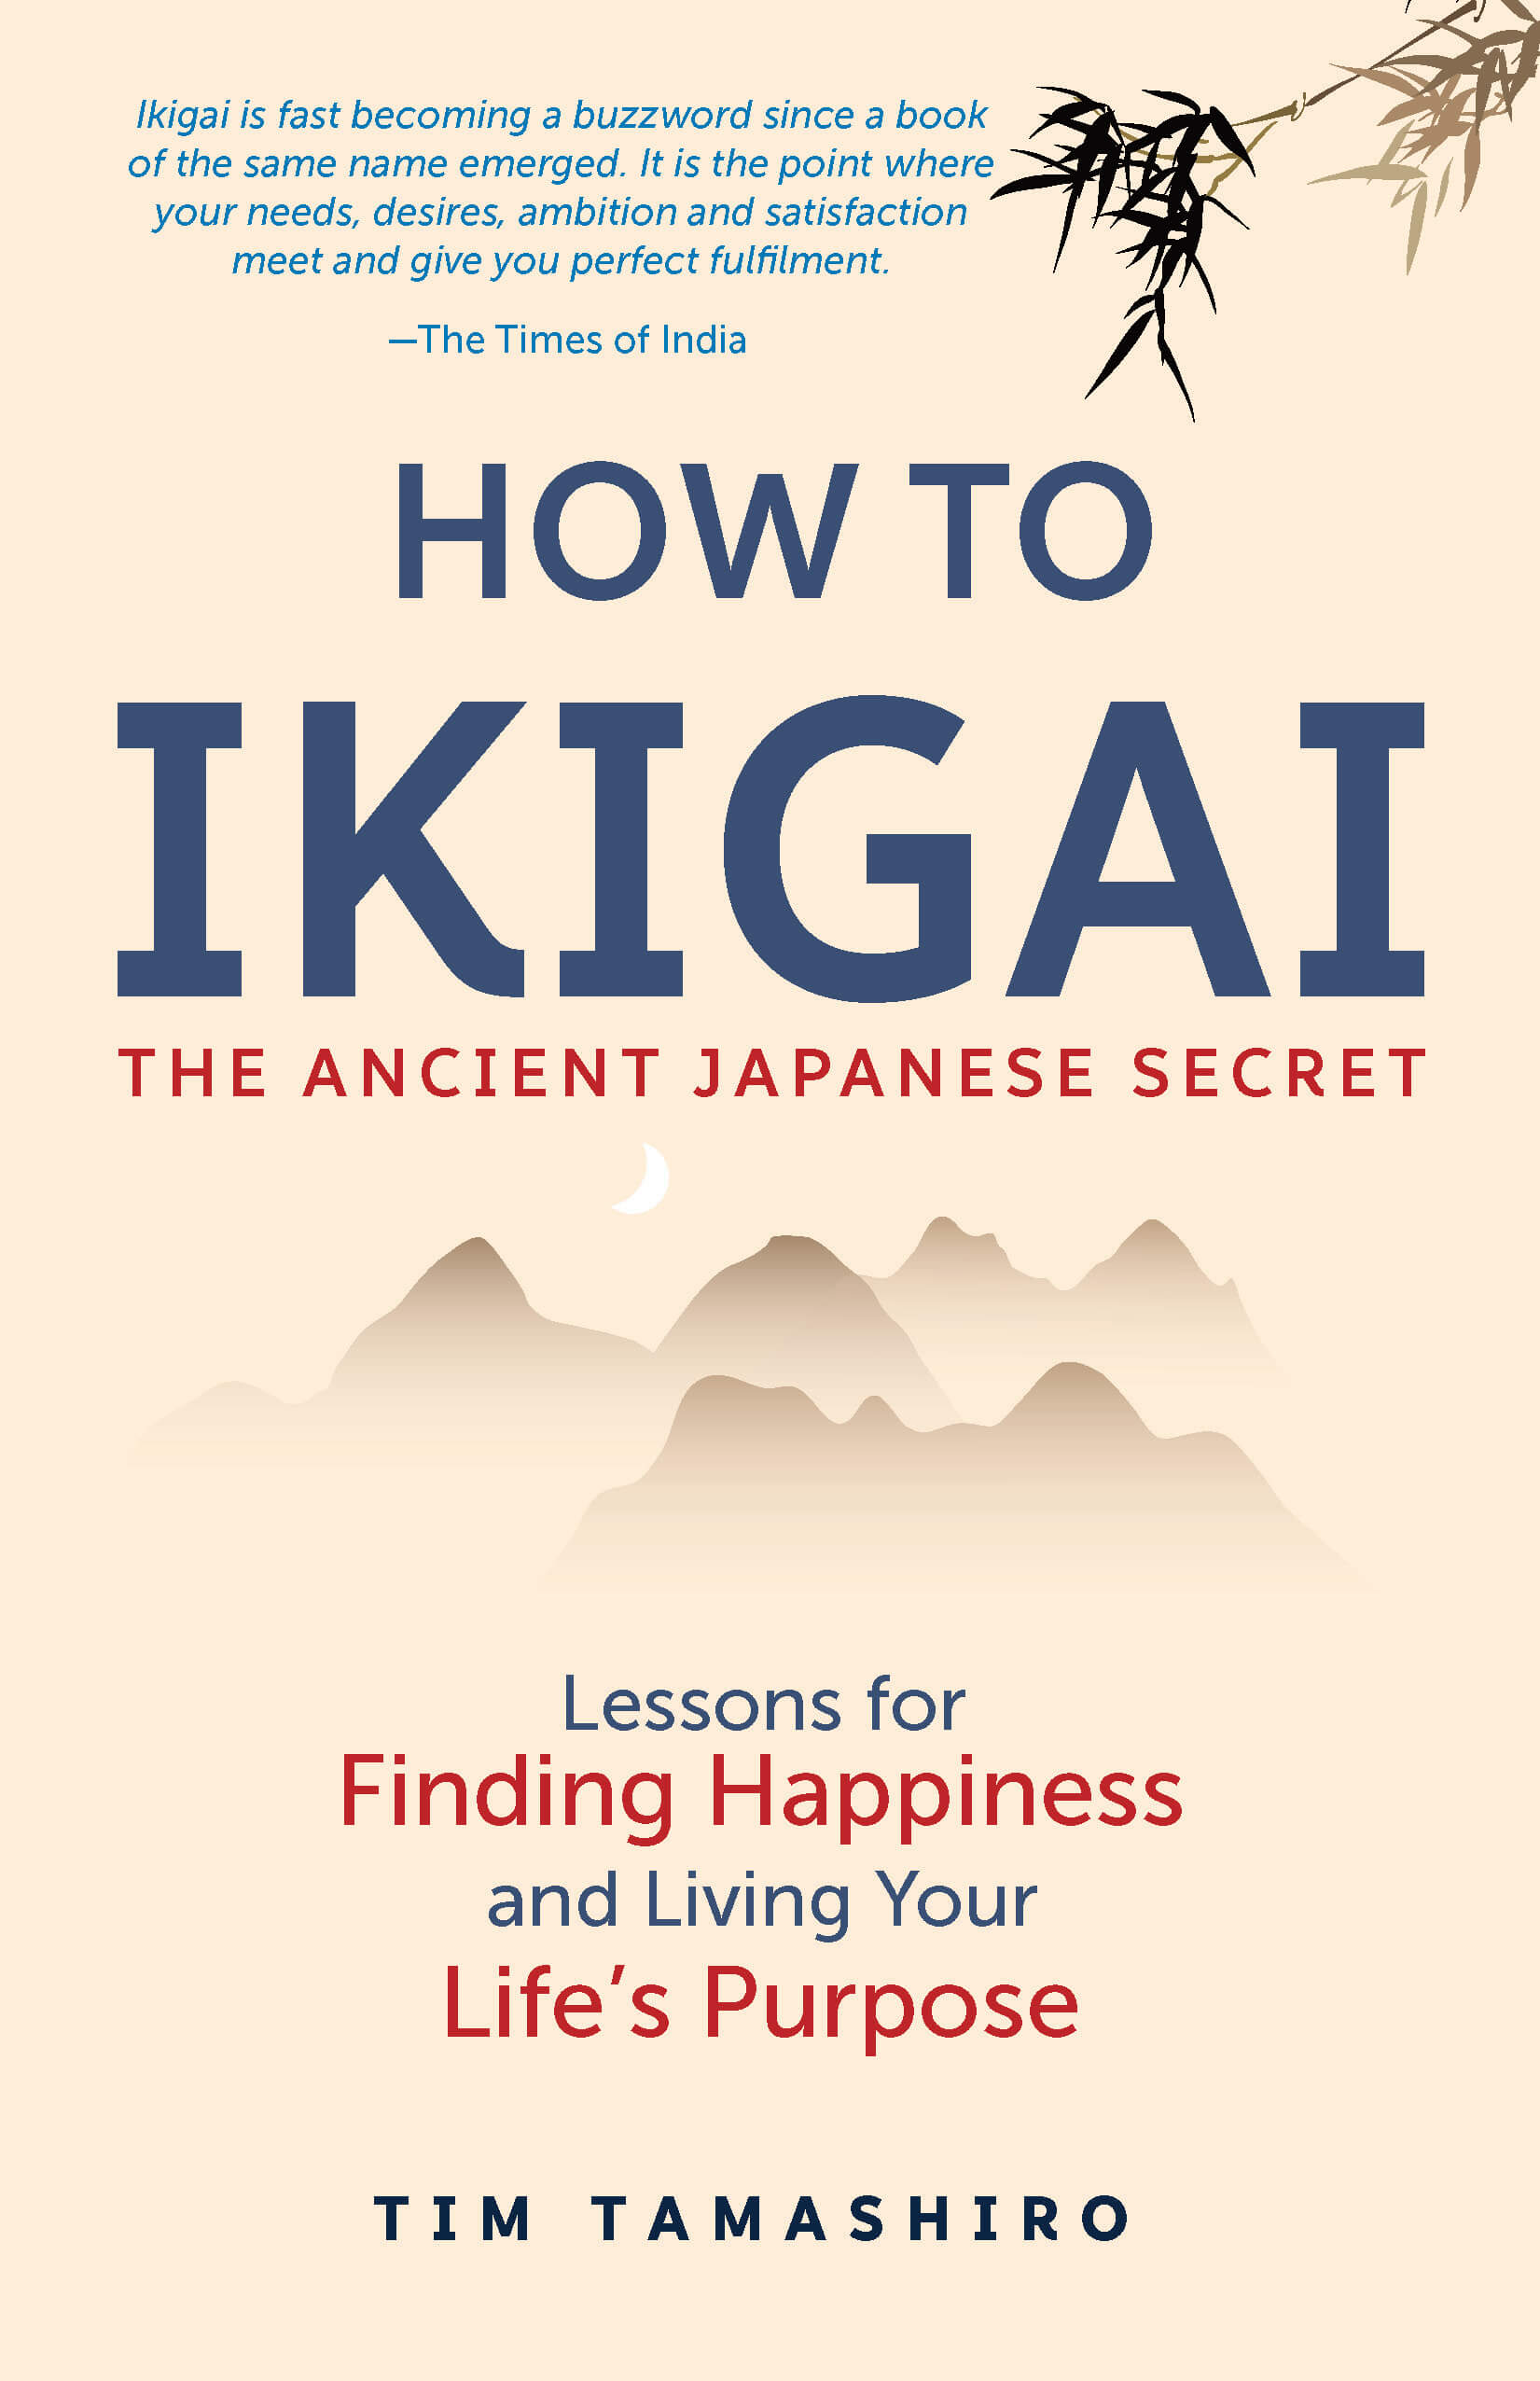 How To Ikigai: The Ancient Japanese Secret